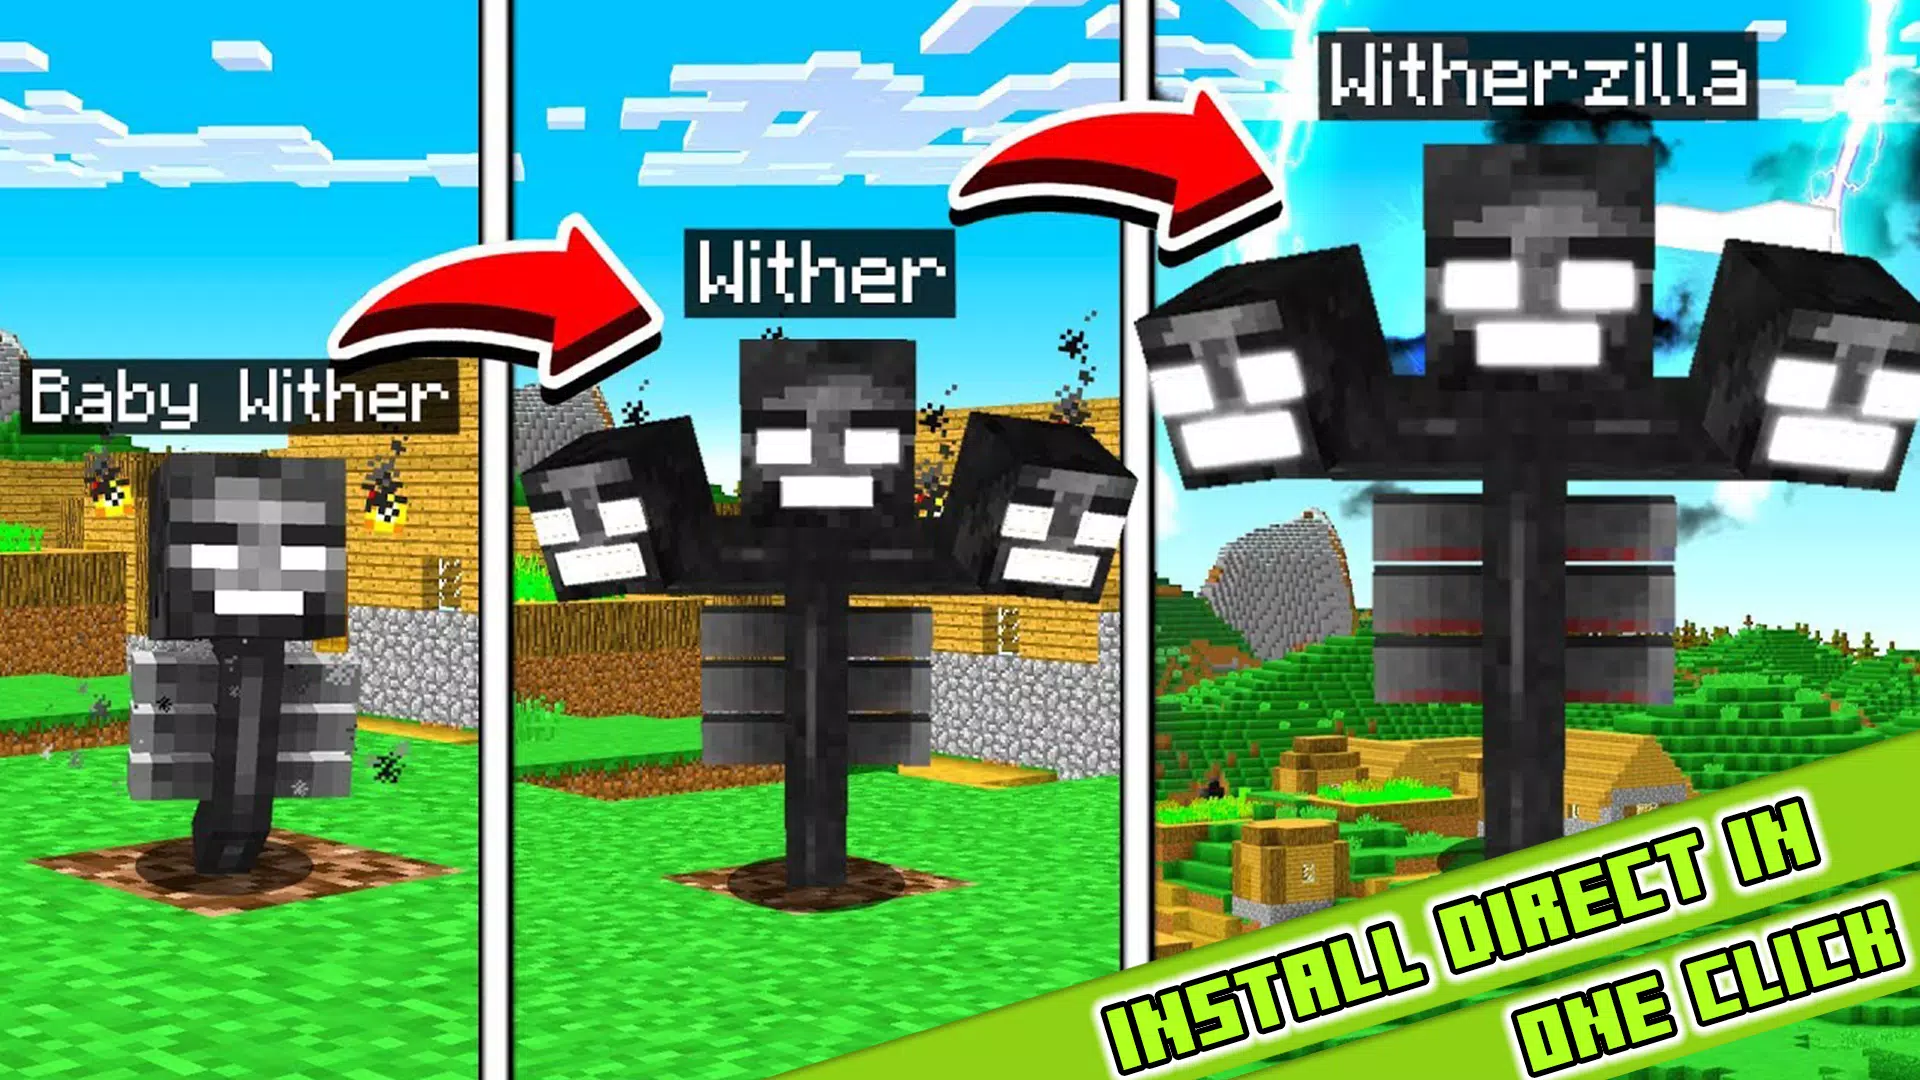 Wither storm Minecraft Coloring Page for Kids - Free Minecraft